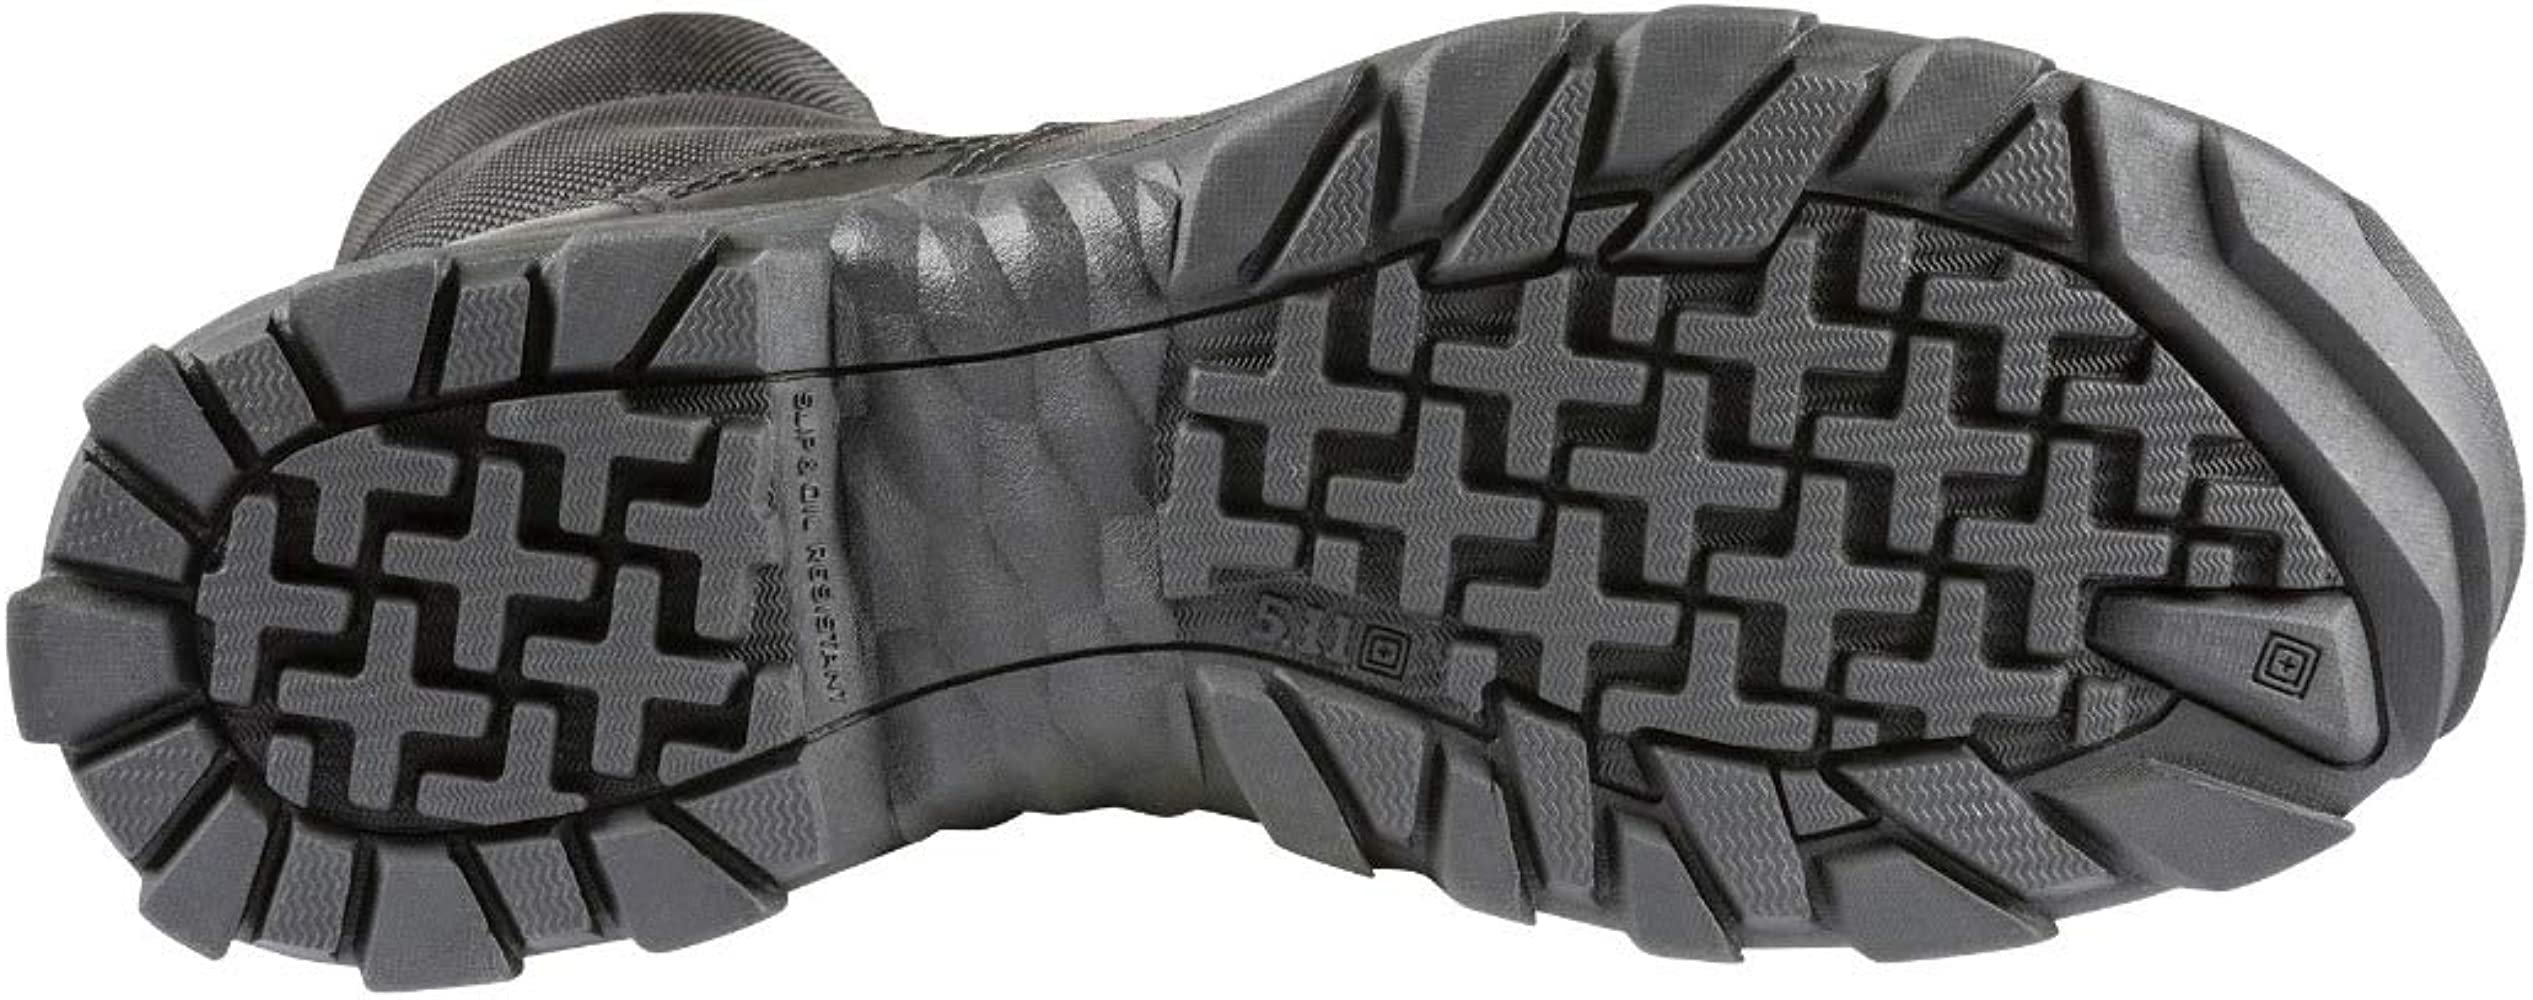 5.11 Work Gear Men's Speed 3.0 Urban Sidezip Boot, Ortholite Insole, Moisture Wicking, Black, 8.5 Wide, Style 12336 - image 5 of 6